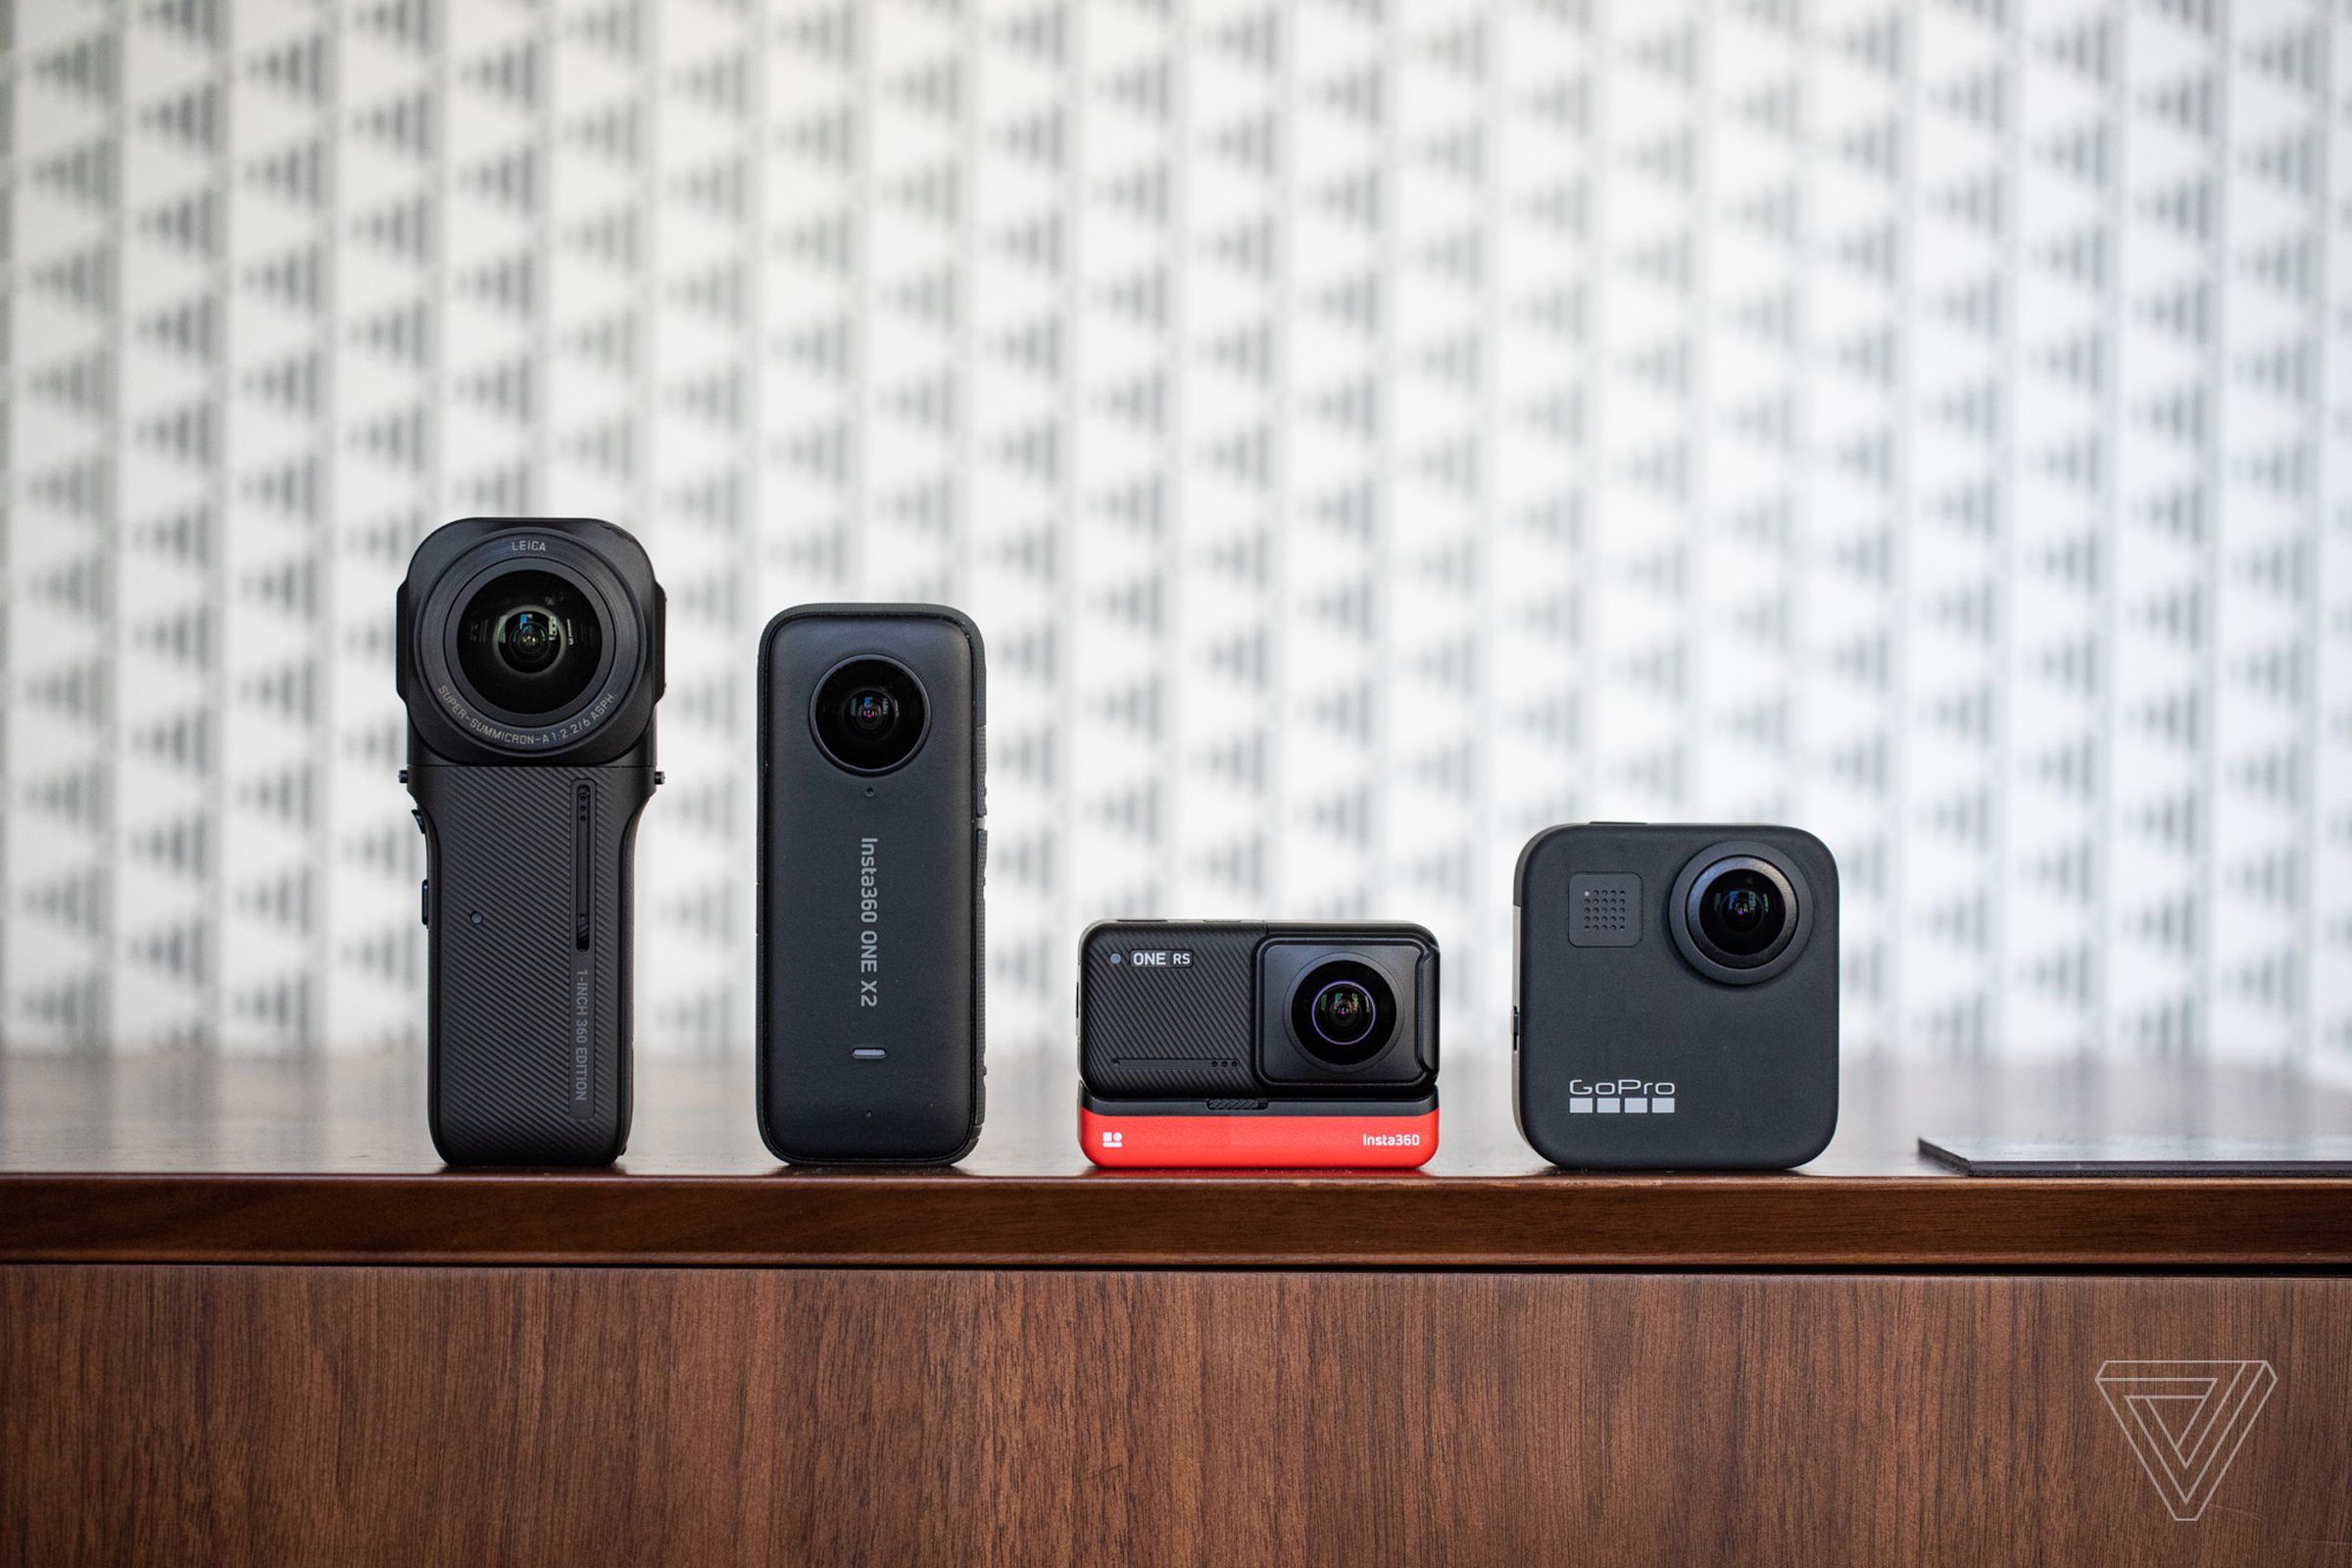 From left to right: Insta360 One RS 1-inch 360 edition, Insta360 One X2, Insta360 One RS with 5.7k 360 mod, and the GoPro Hero Max.